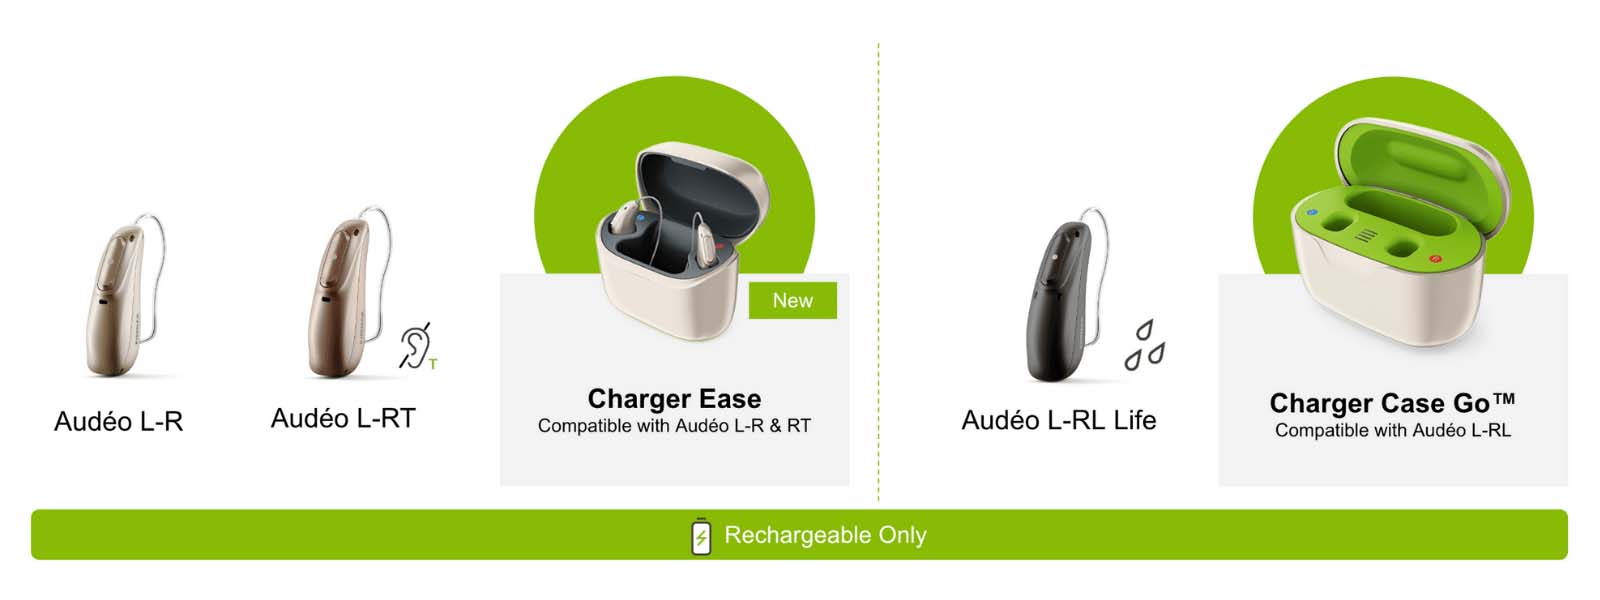 phonak charger case go for phonak audeo life waterproof hearing aids comparison to phonak charger ease for Audeo Lumity hearing aids use different chargers